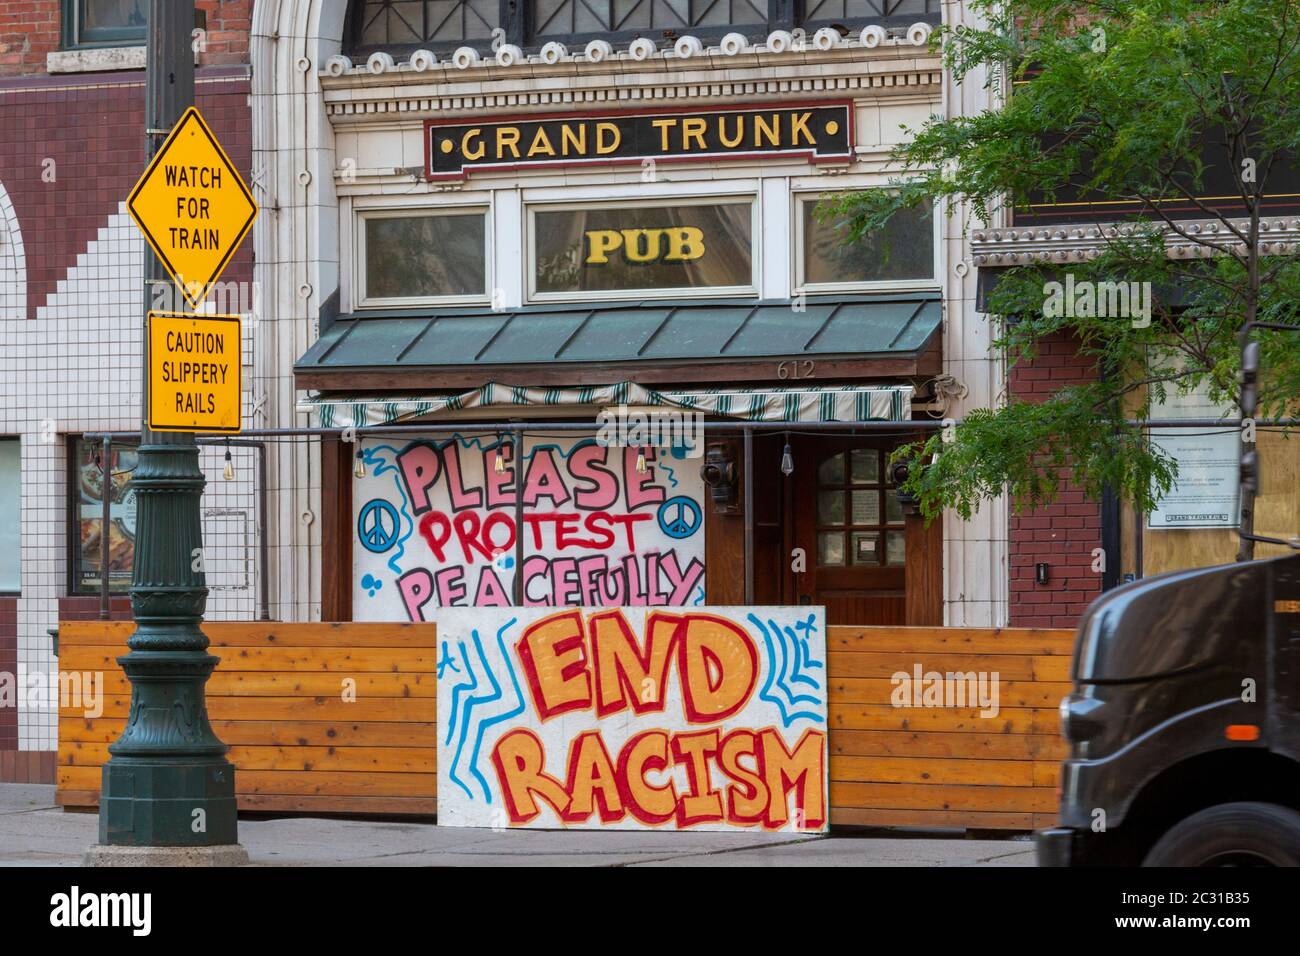 Detroit, Michigan - The Grand Trunk Pub, closed due to the coronavirus pandemic, has posted signs supporting protests against police brutality. Stock Photo